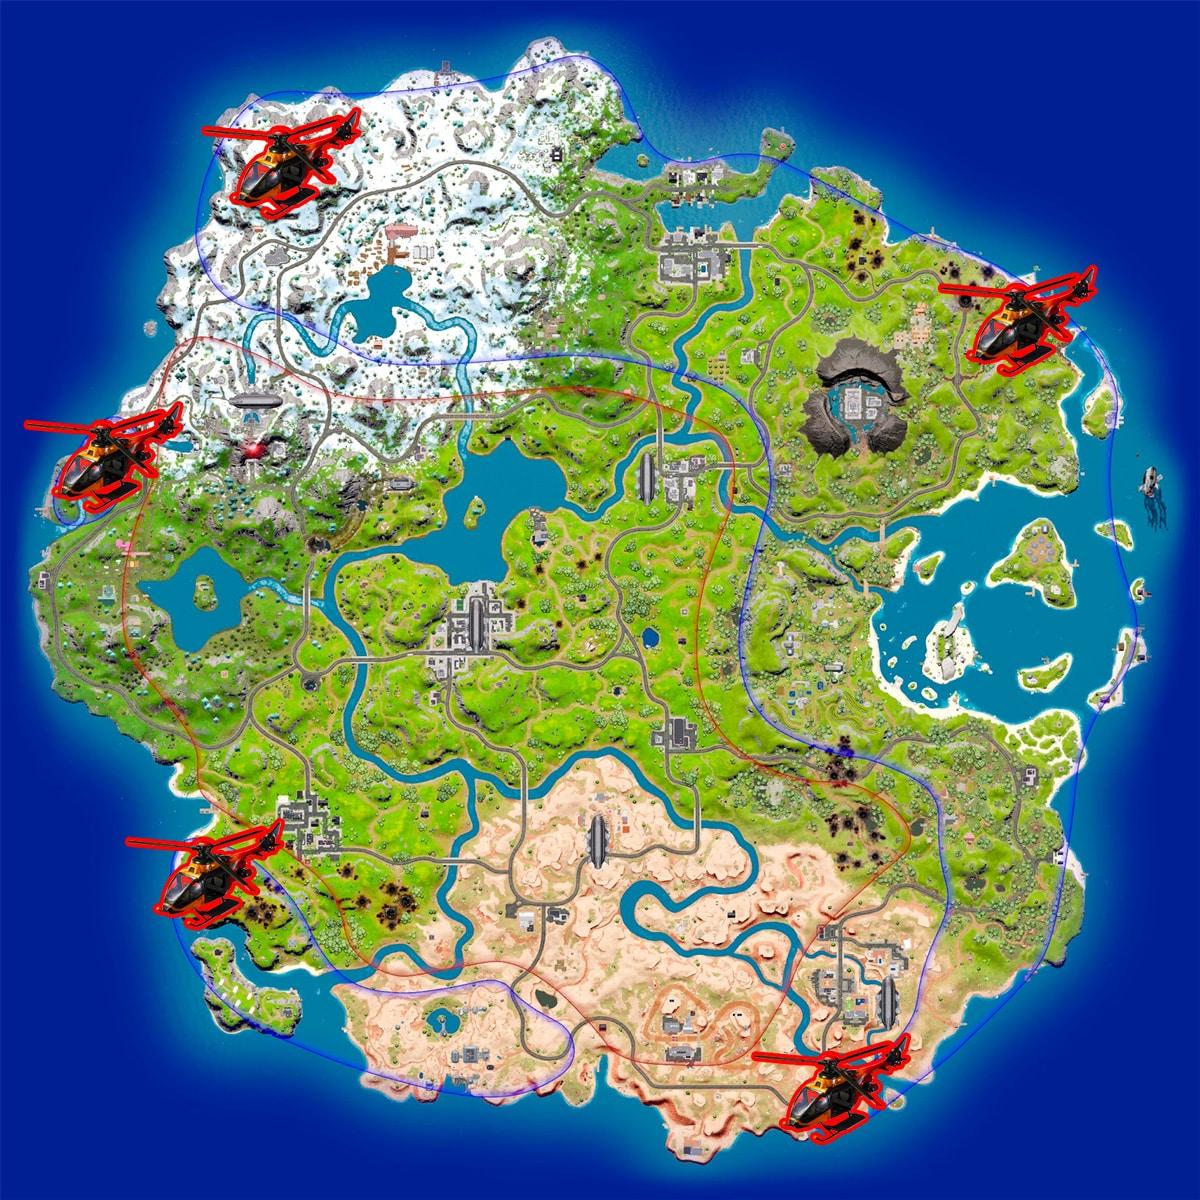 All Choppa helicopter locations marked on the Fortnite map